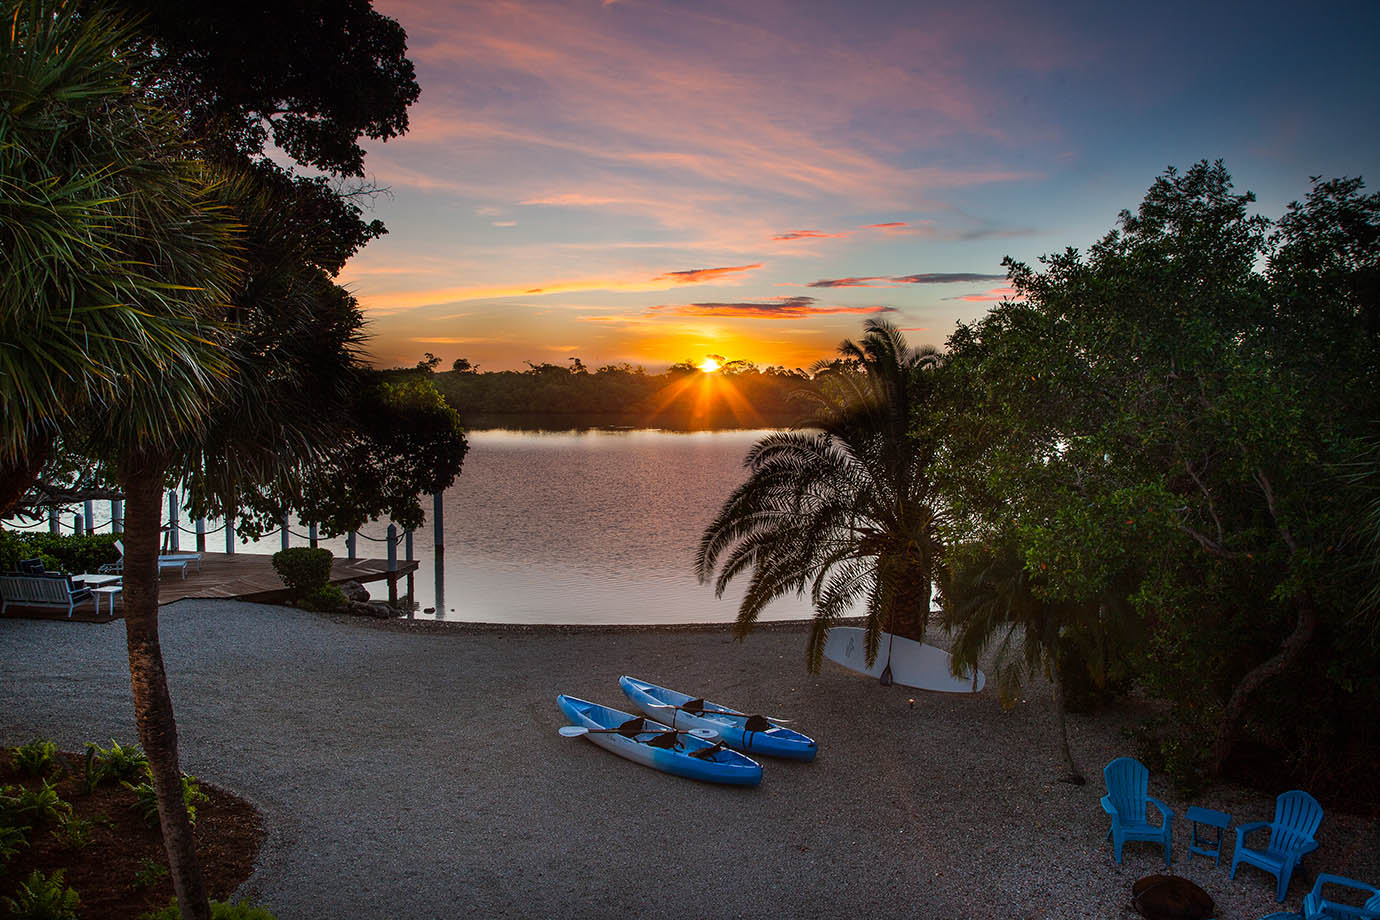 Sunset view from the private Sea Oats Estate with kayaks on the beach and a view of the private dock and a fire pit with blue adirondack chairs